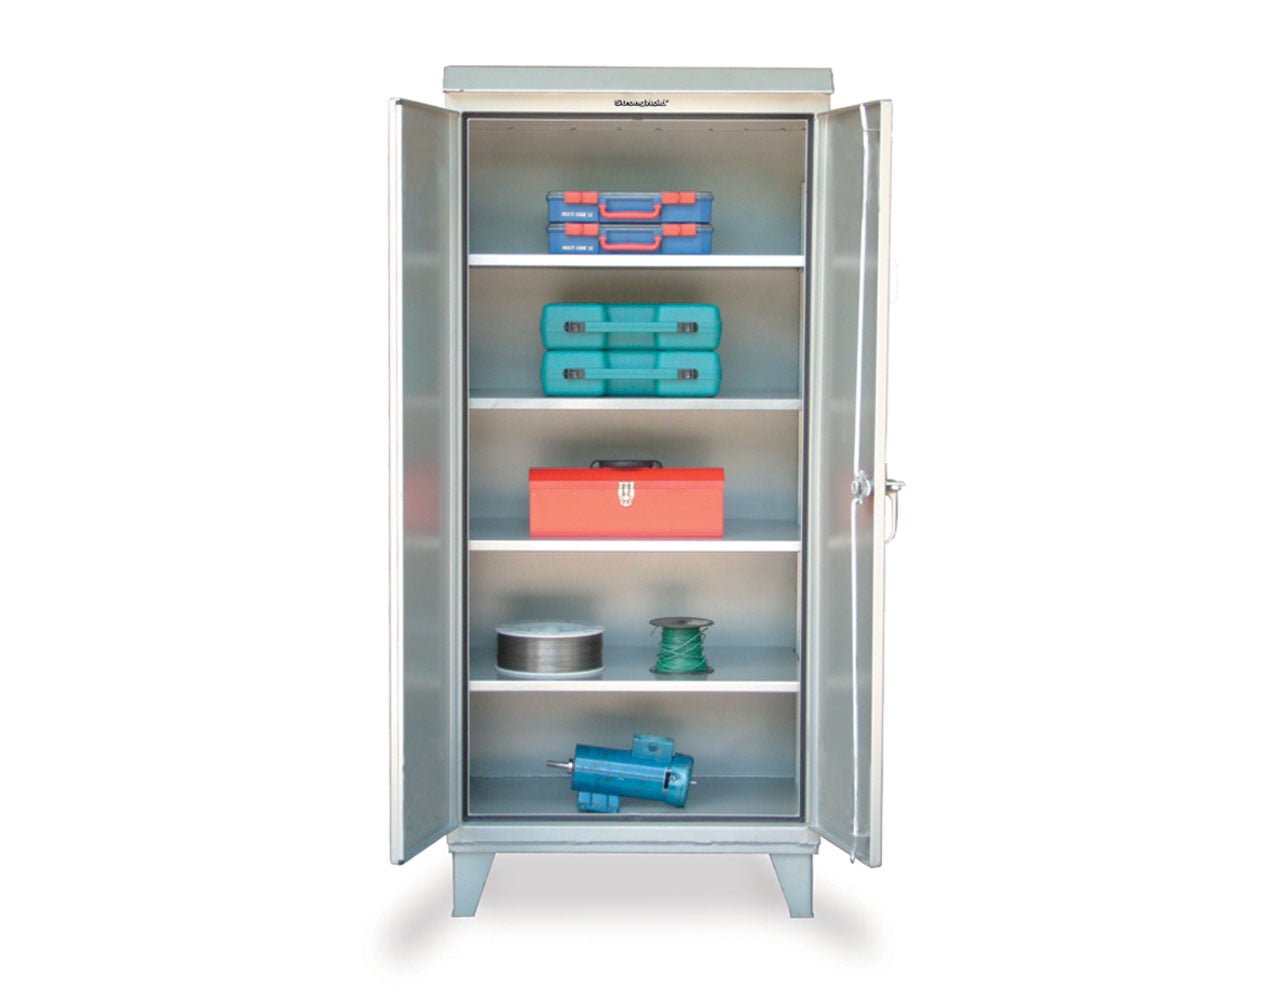 Extreme Duty 12 GA Stainless Steel Weather-Resistant Cabinet with 4 Shelves - 36 In. W x 24 In. D x 79¾ In. H